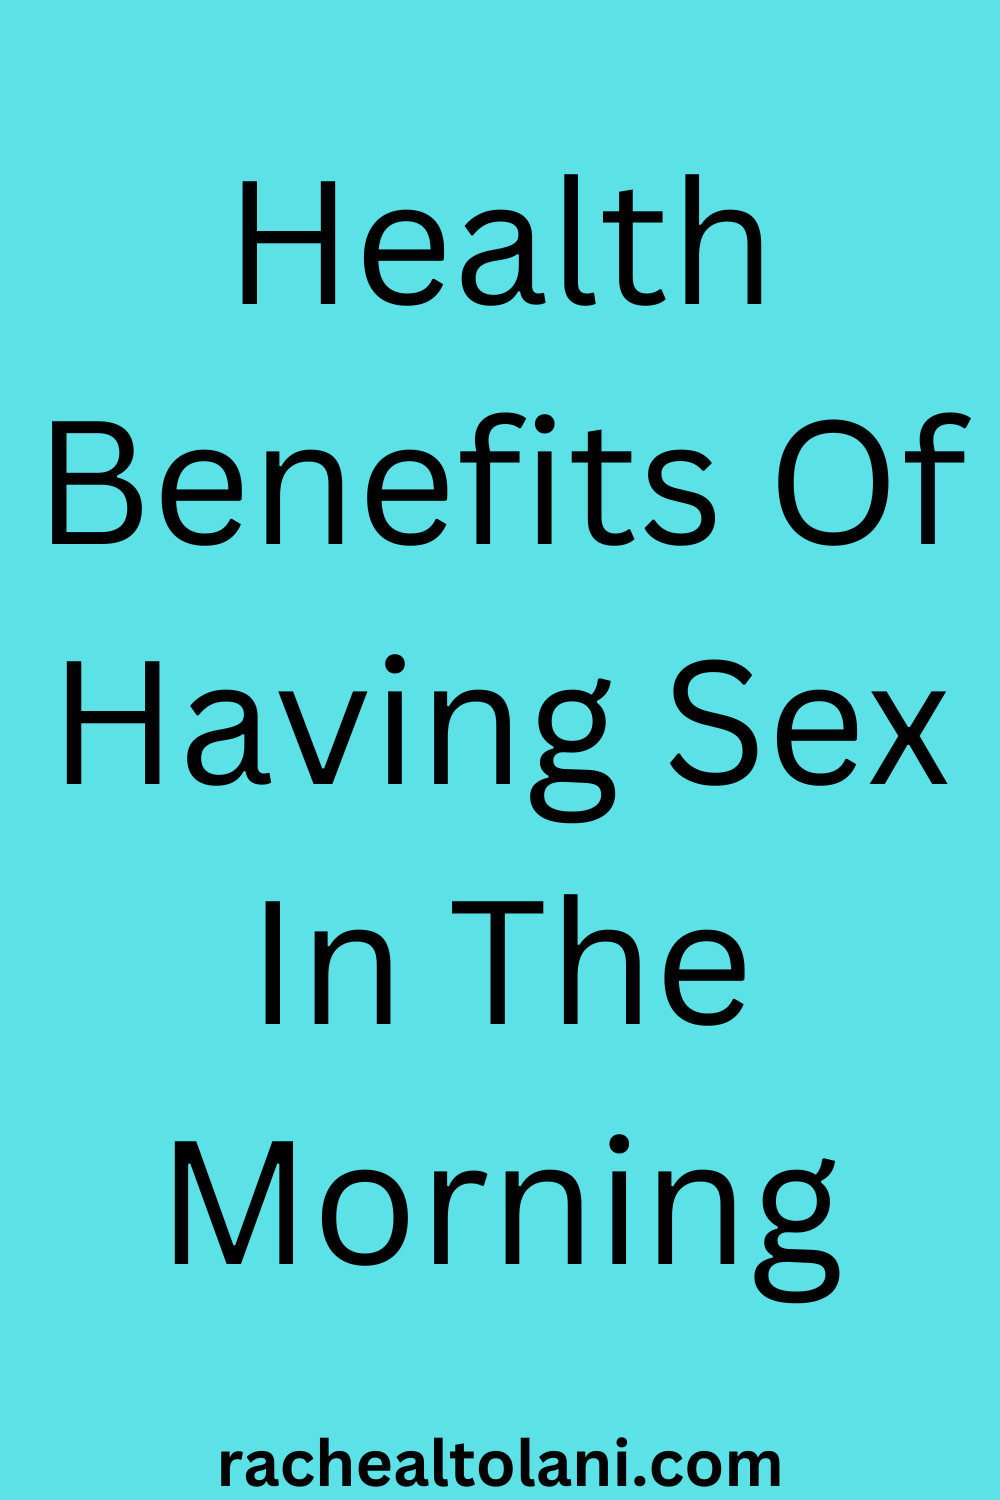 13 Surprising Health Benefits Of Morning Sex You Should Know